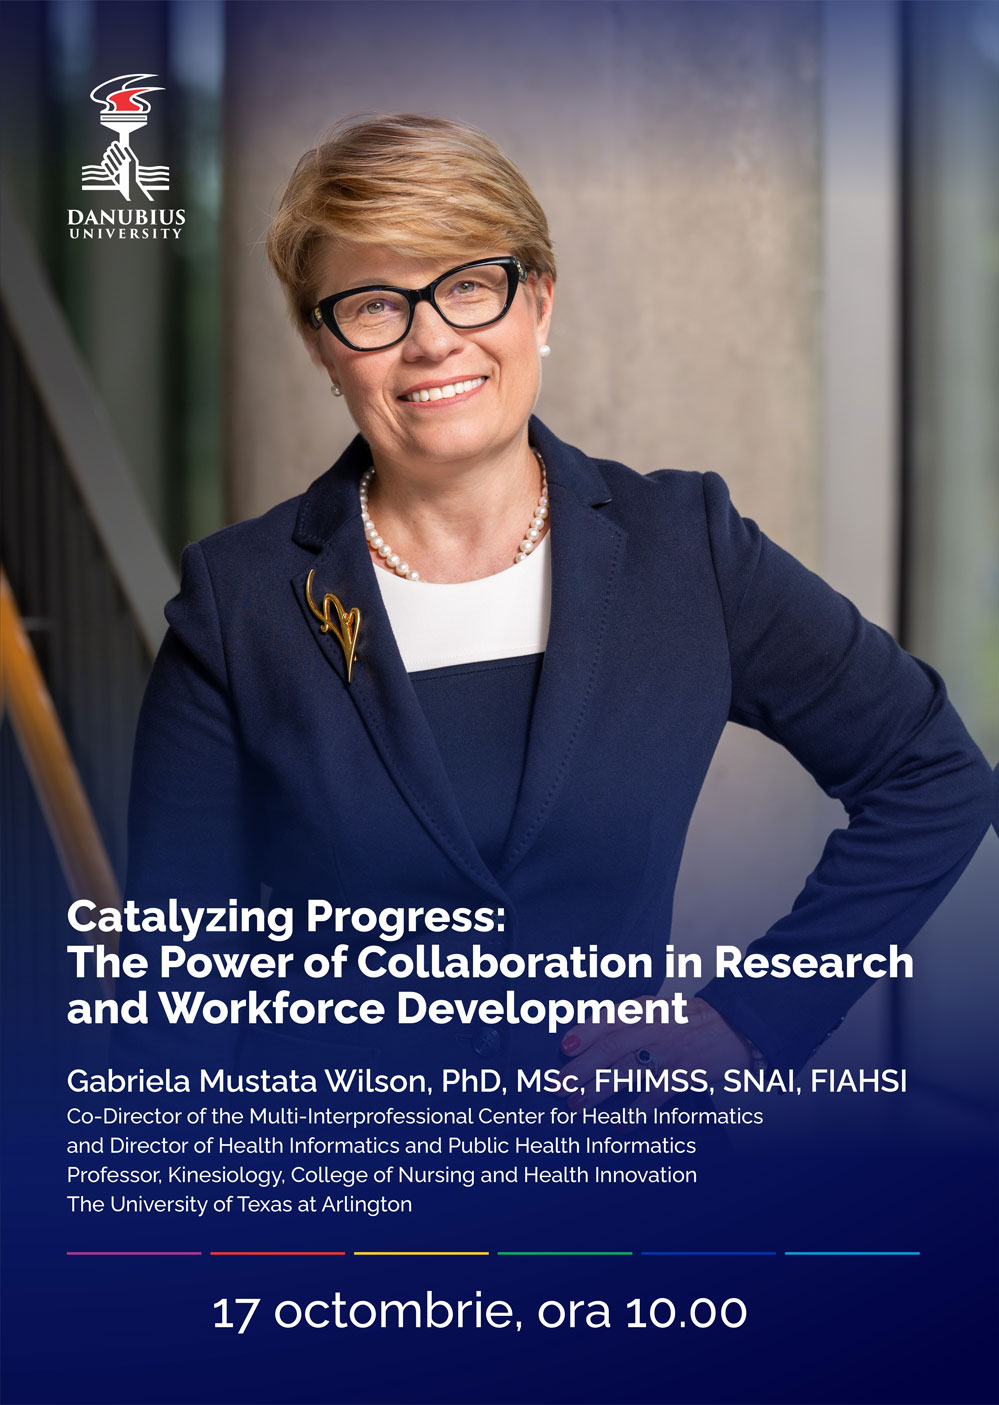 Catalyzing Progress: The Power of Collaboration in Research and Workforce Development